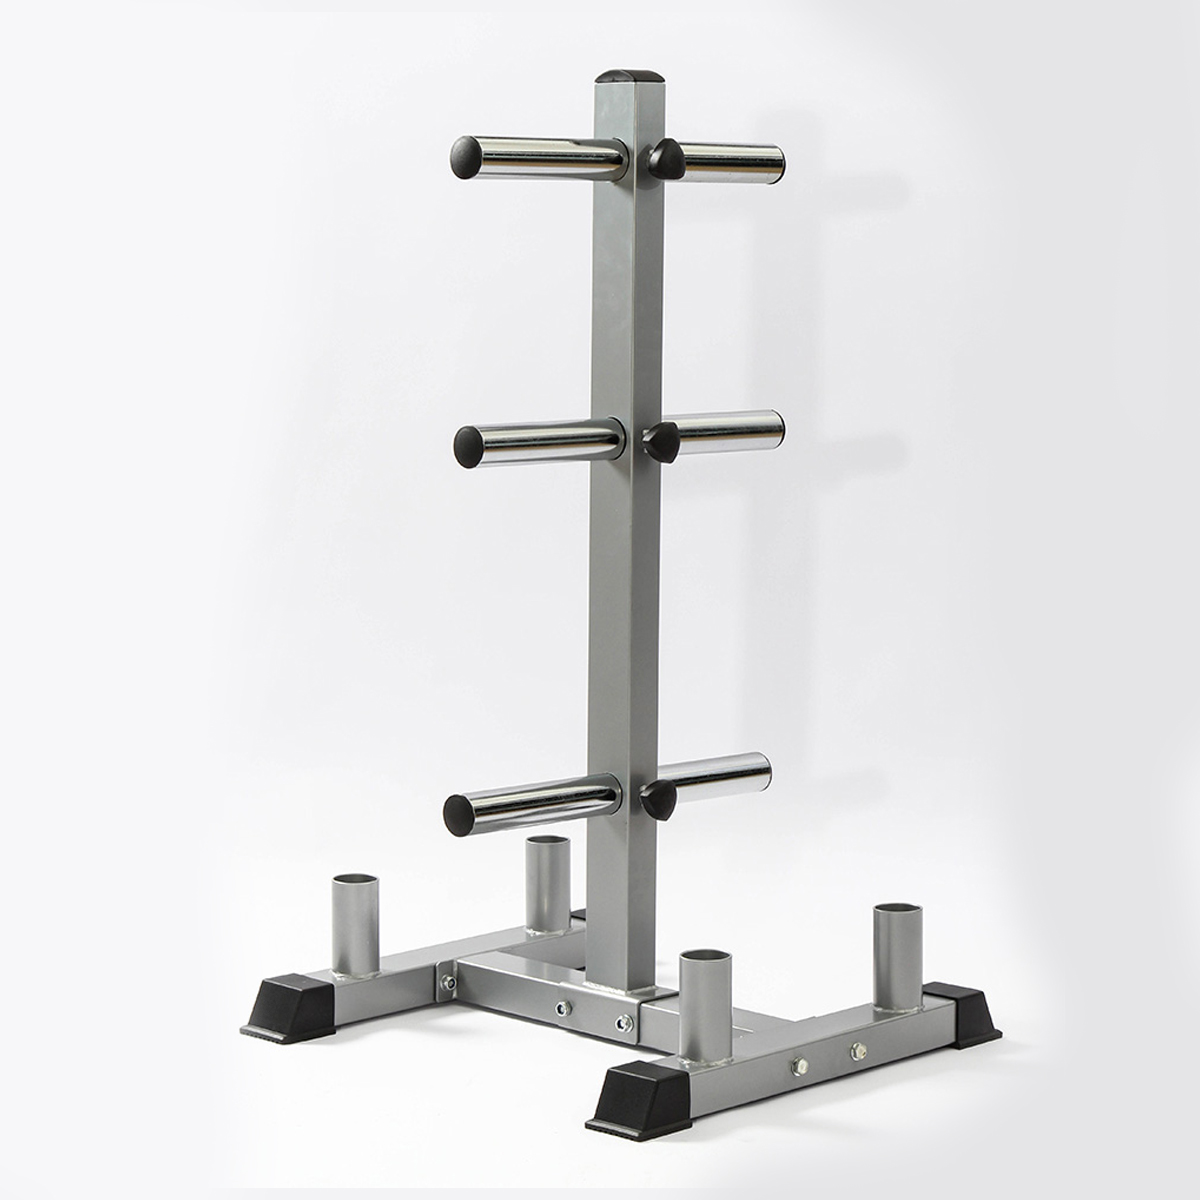 Bumper-Weight-Plate-Storage-Tree-Rack-Olympic-Barbell-Bar-Stand-Holder-Organizer-1766049-7